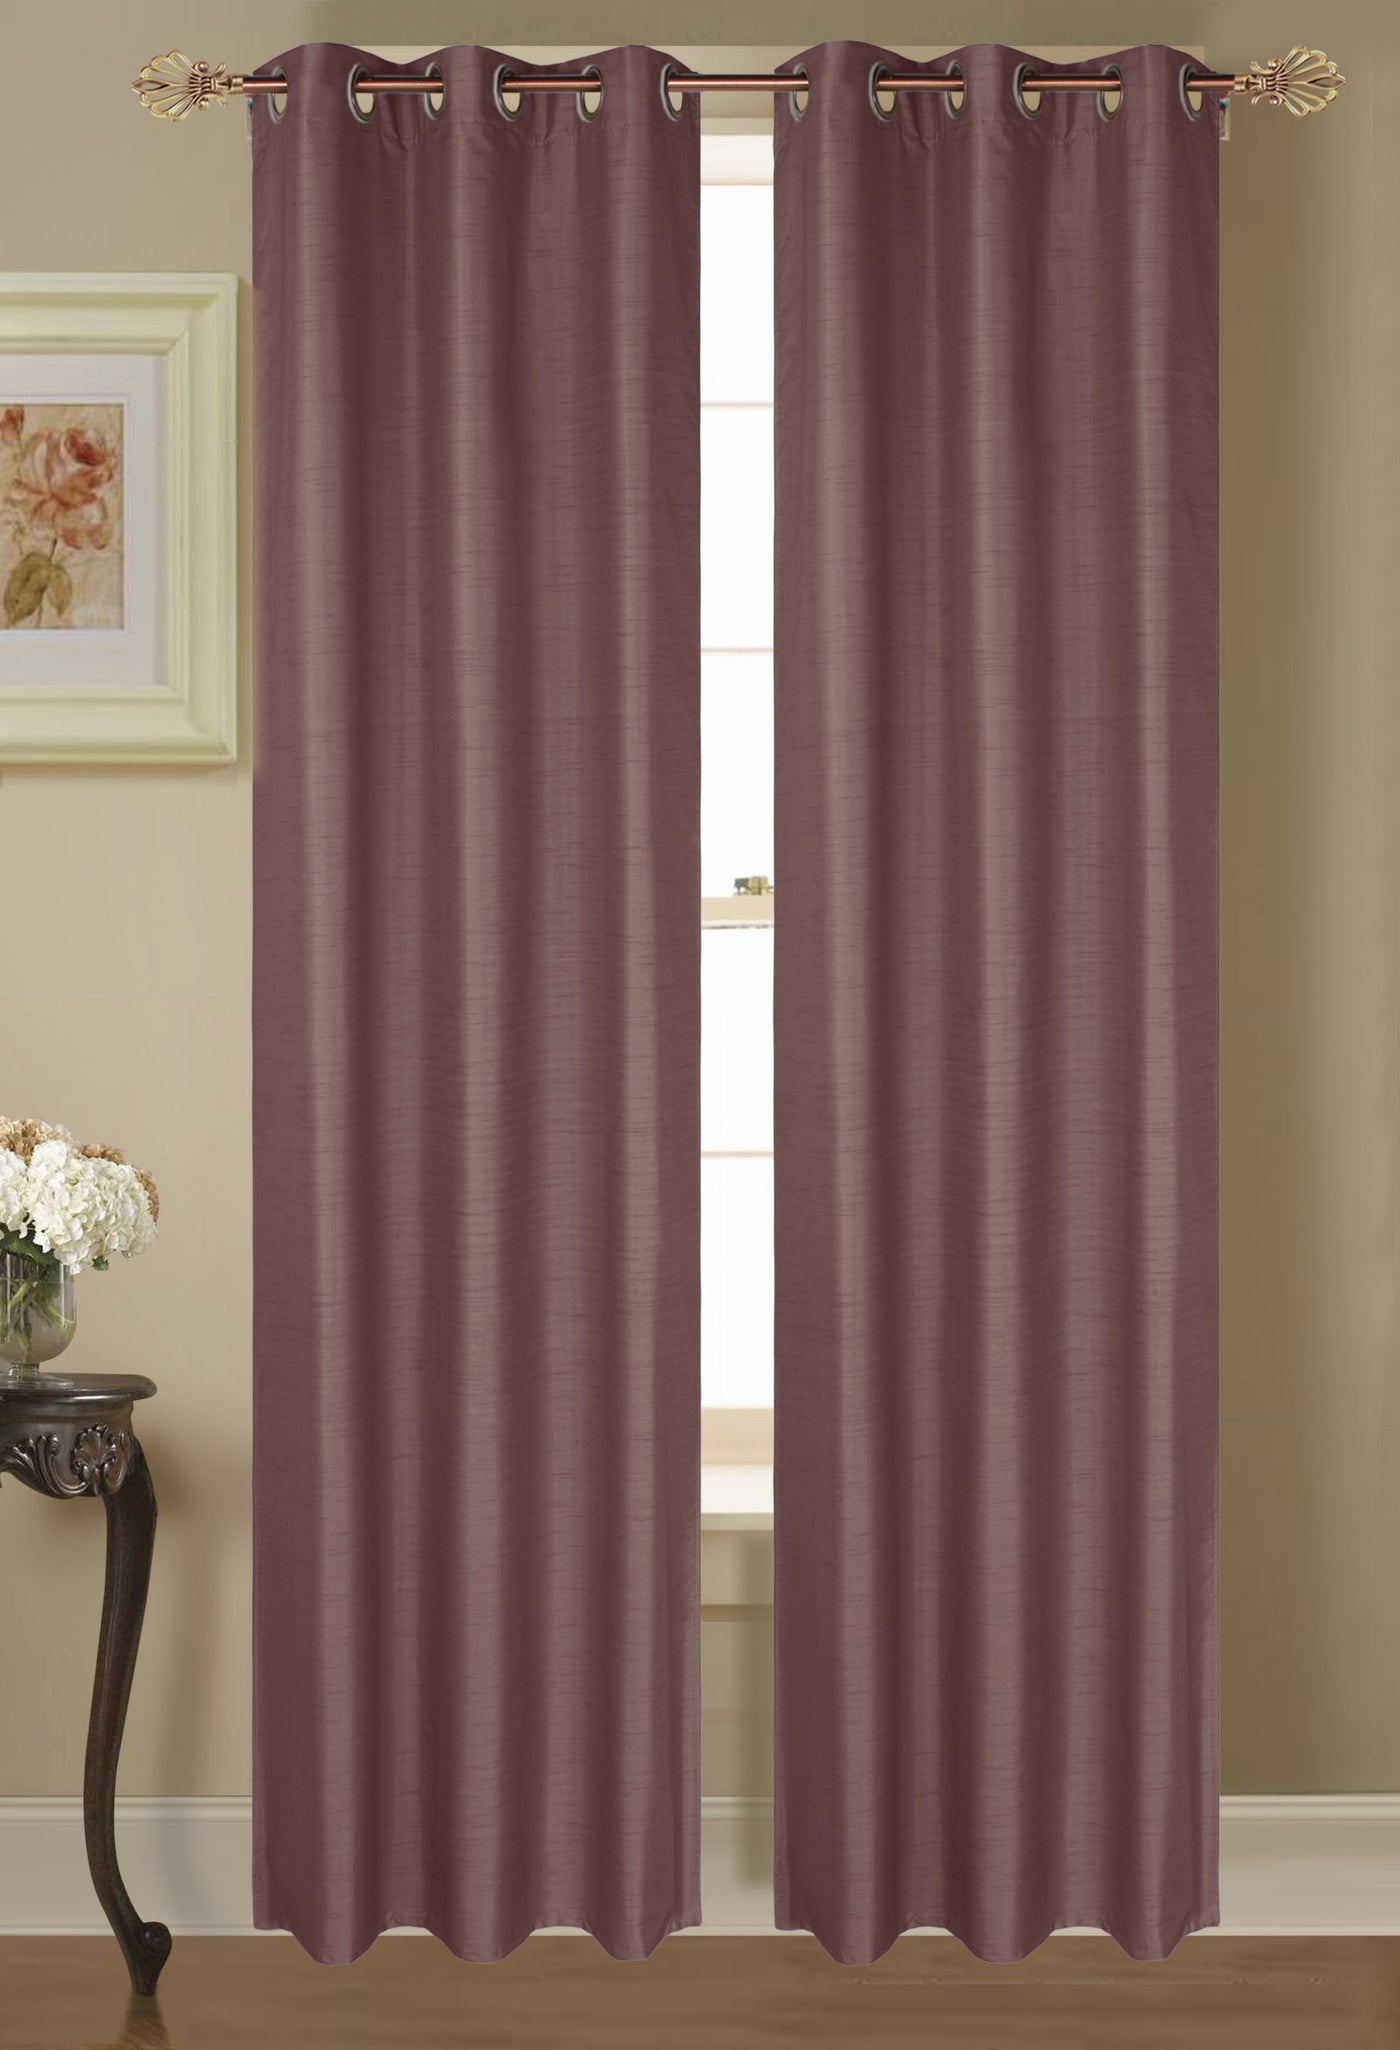 2pc Solid Faux Silk Grommet Top Curtains for Bedroom Room Darkening Panels Window Treatment Drapes